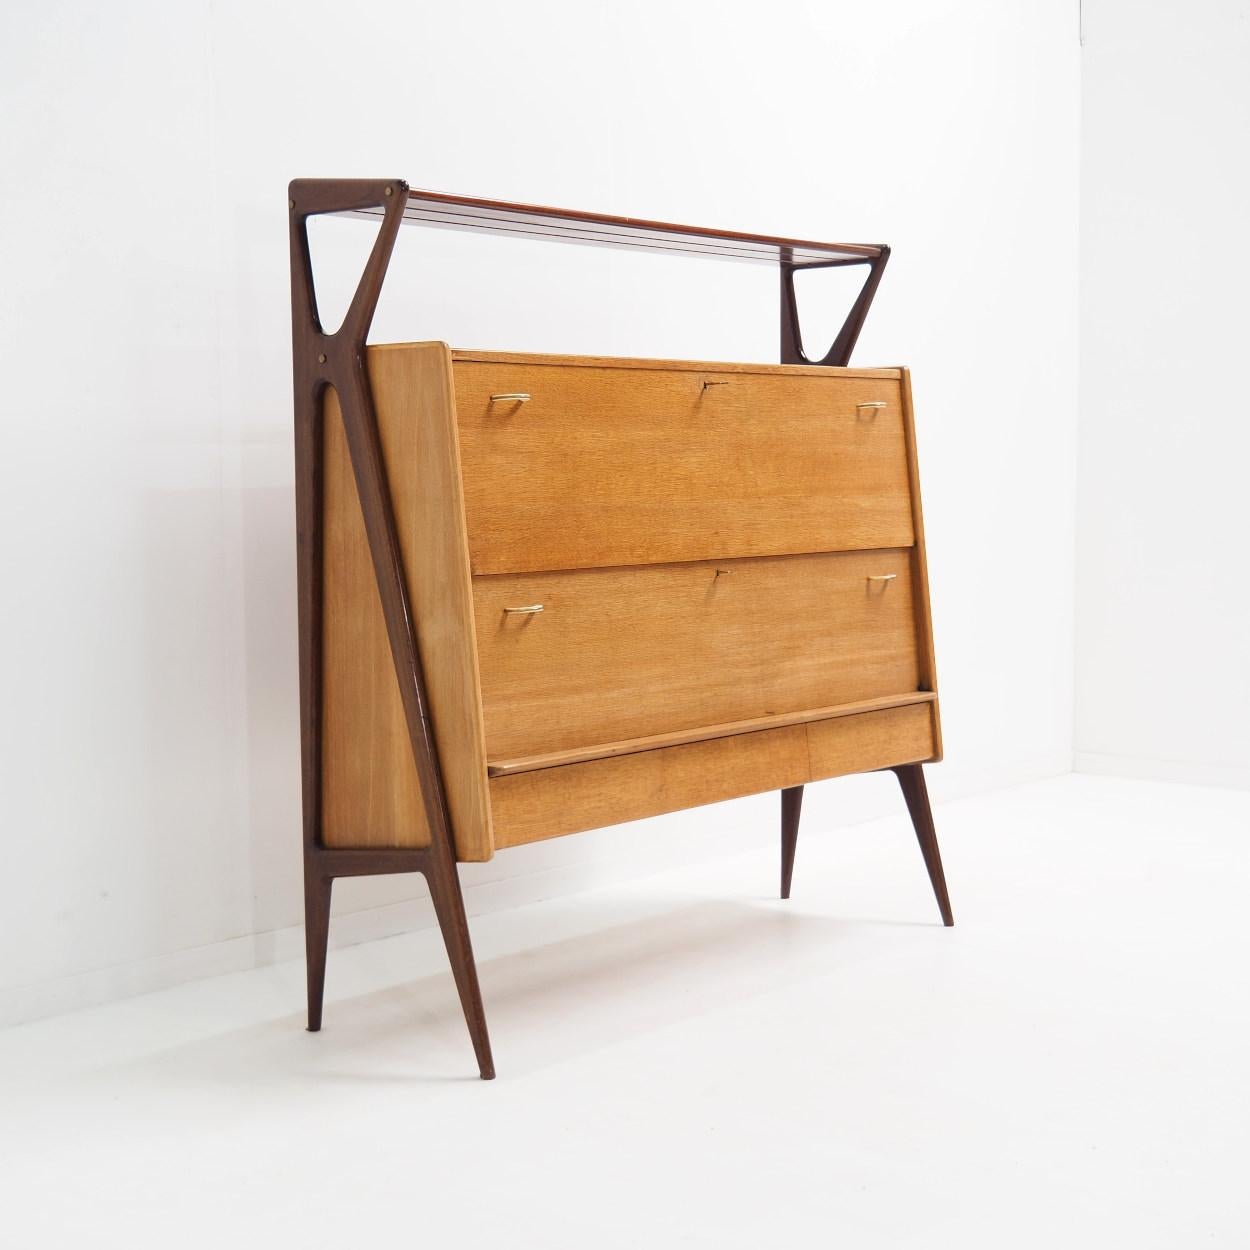 Beautiful bar cabinet designed by Louis Paolozzi for the French manufacturer René Godfroid. With this cabinet, Paolozzi introduced the well-known Italian design from the 1950s to the Rene Godfroid collection. Note the beautifully shaped base and the